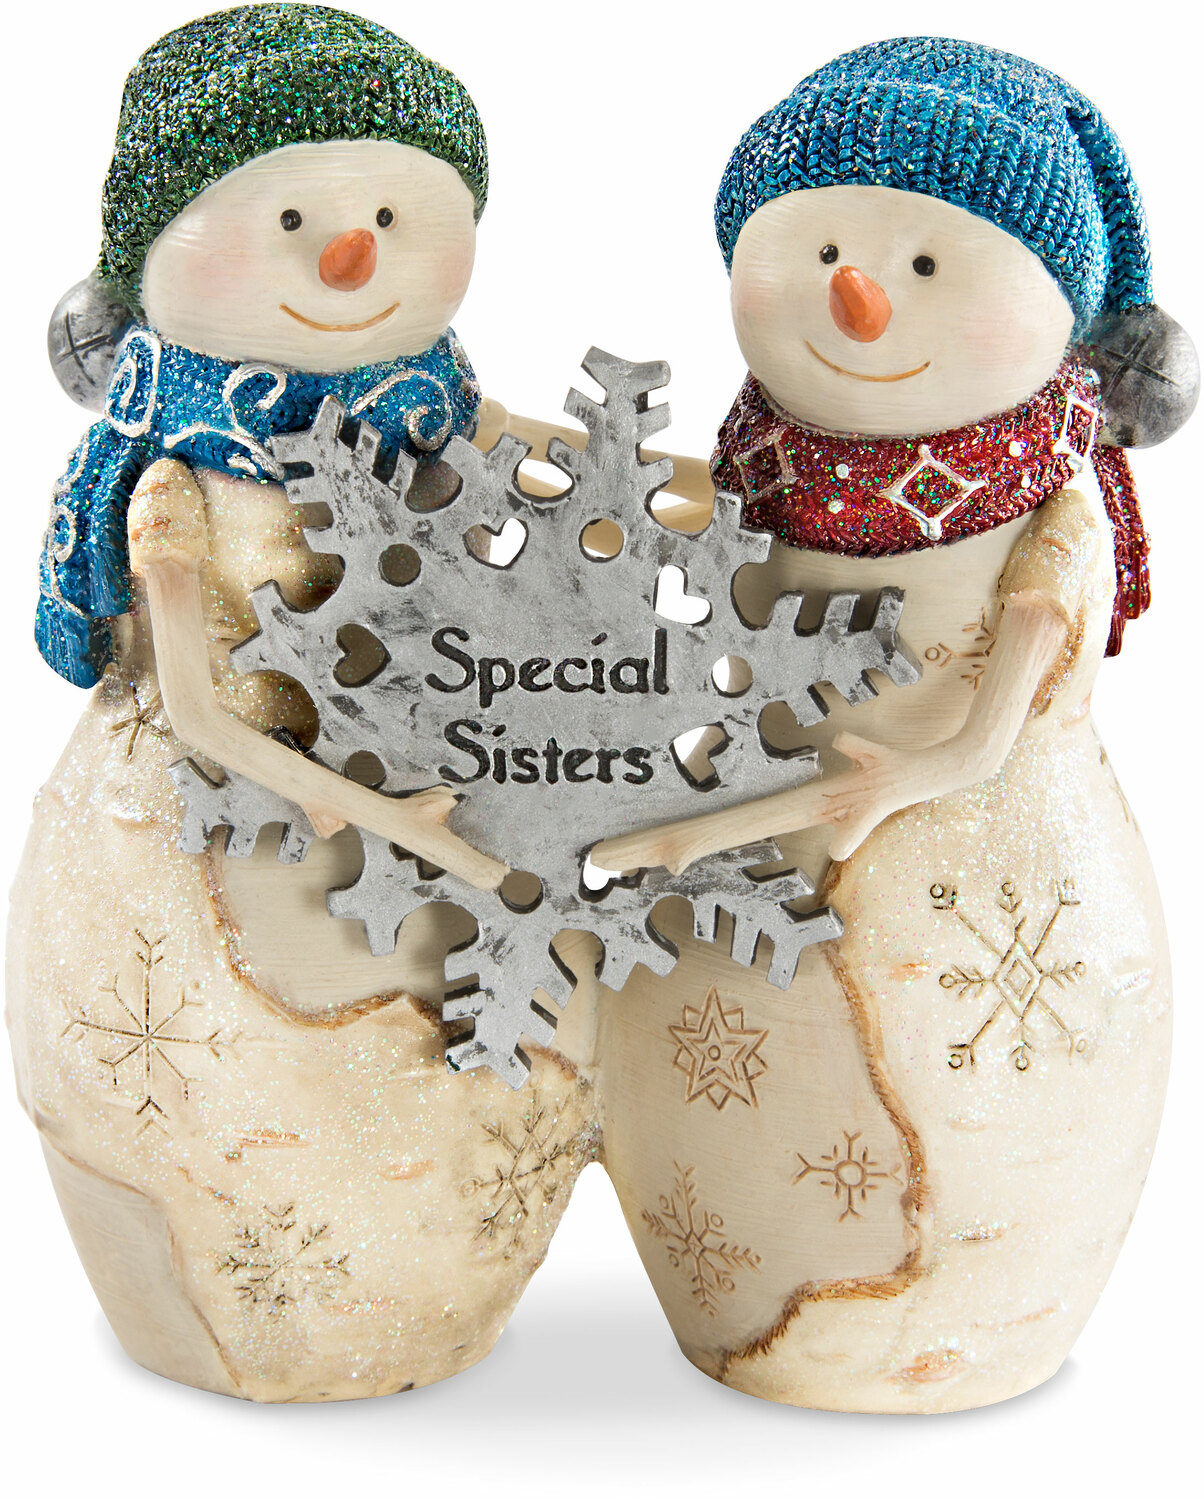 Sisters by The Birchhearts - Sisters - 4.5" Snowwomen holding snowflake